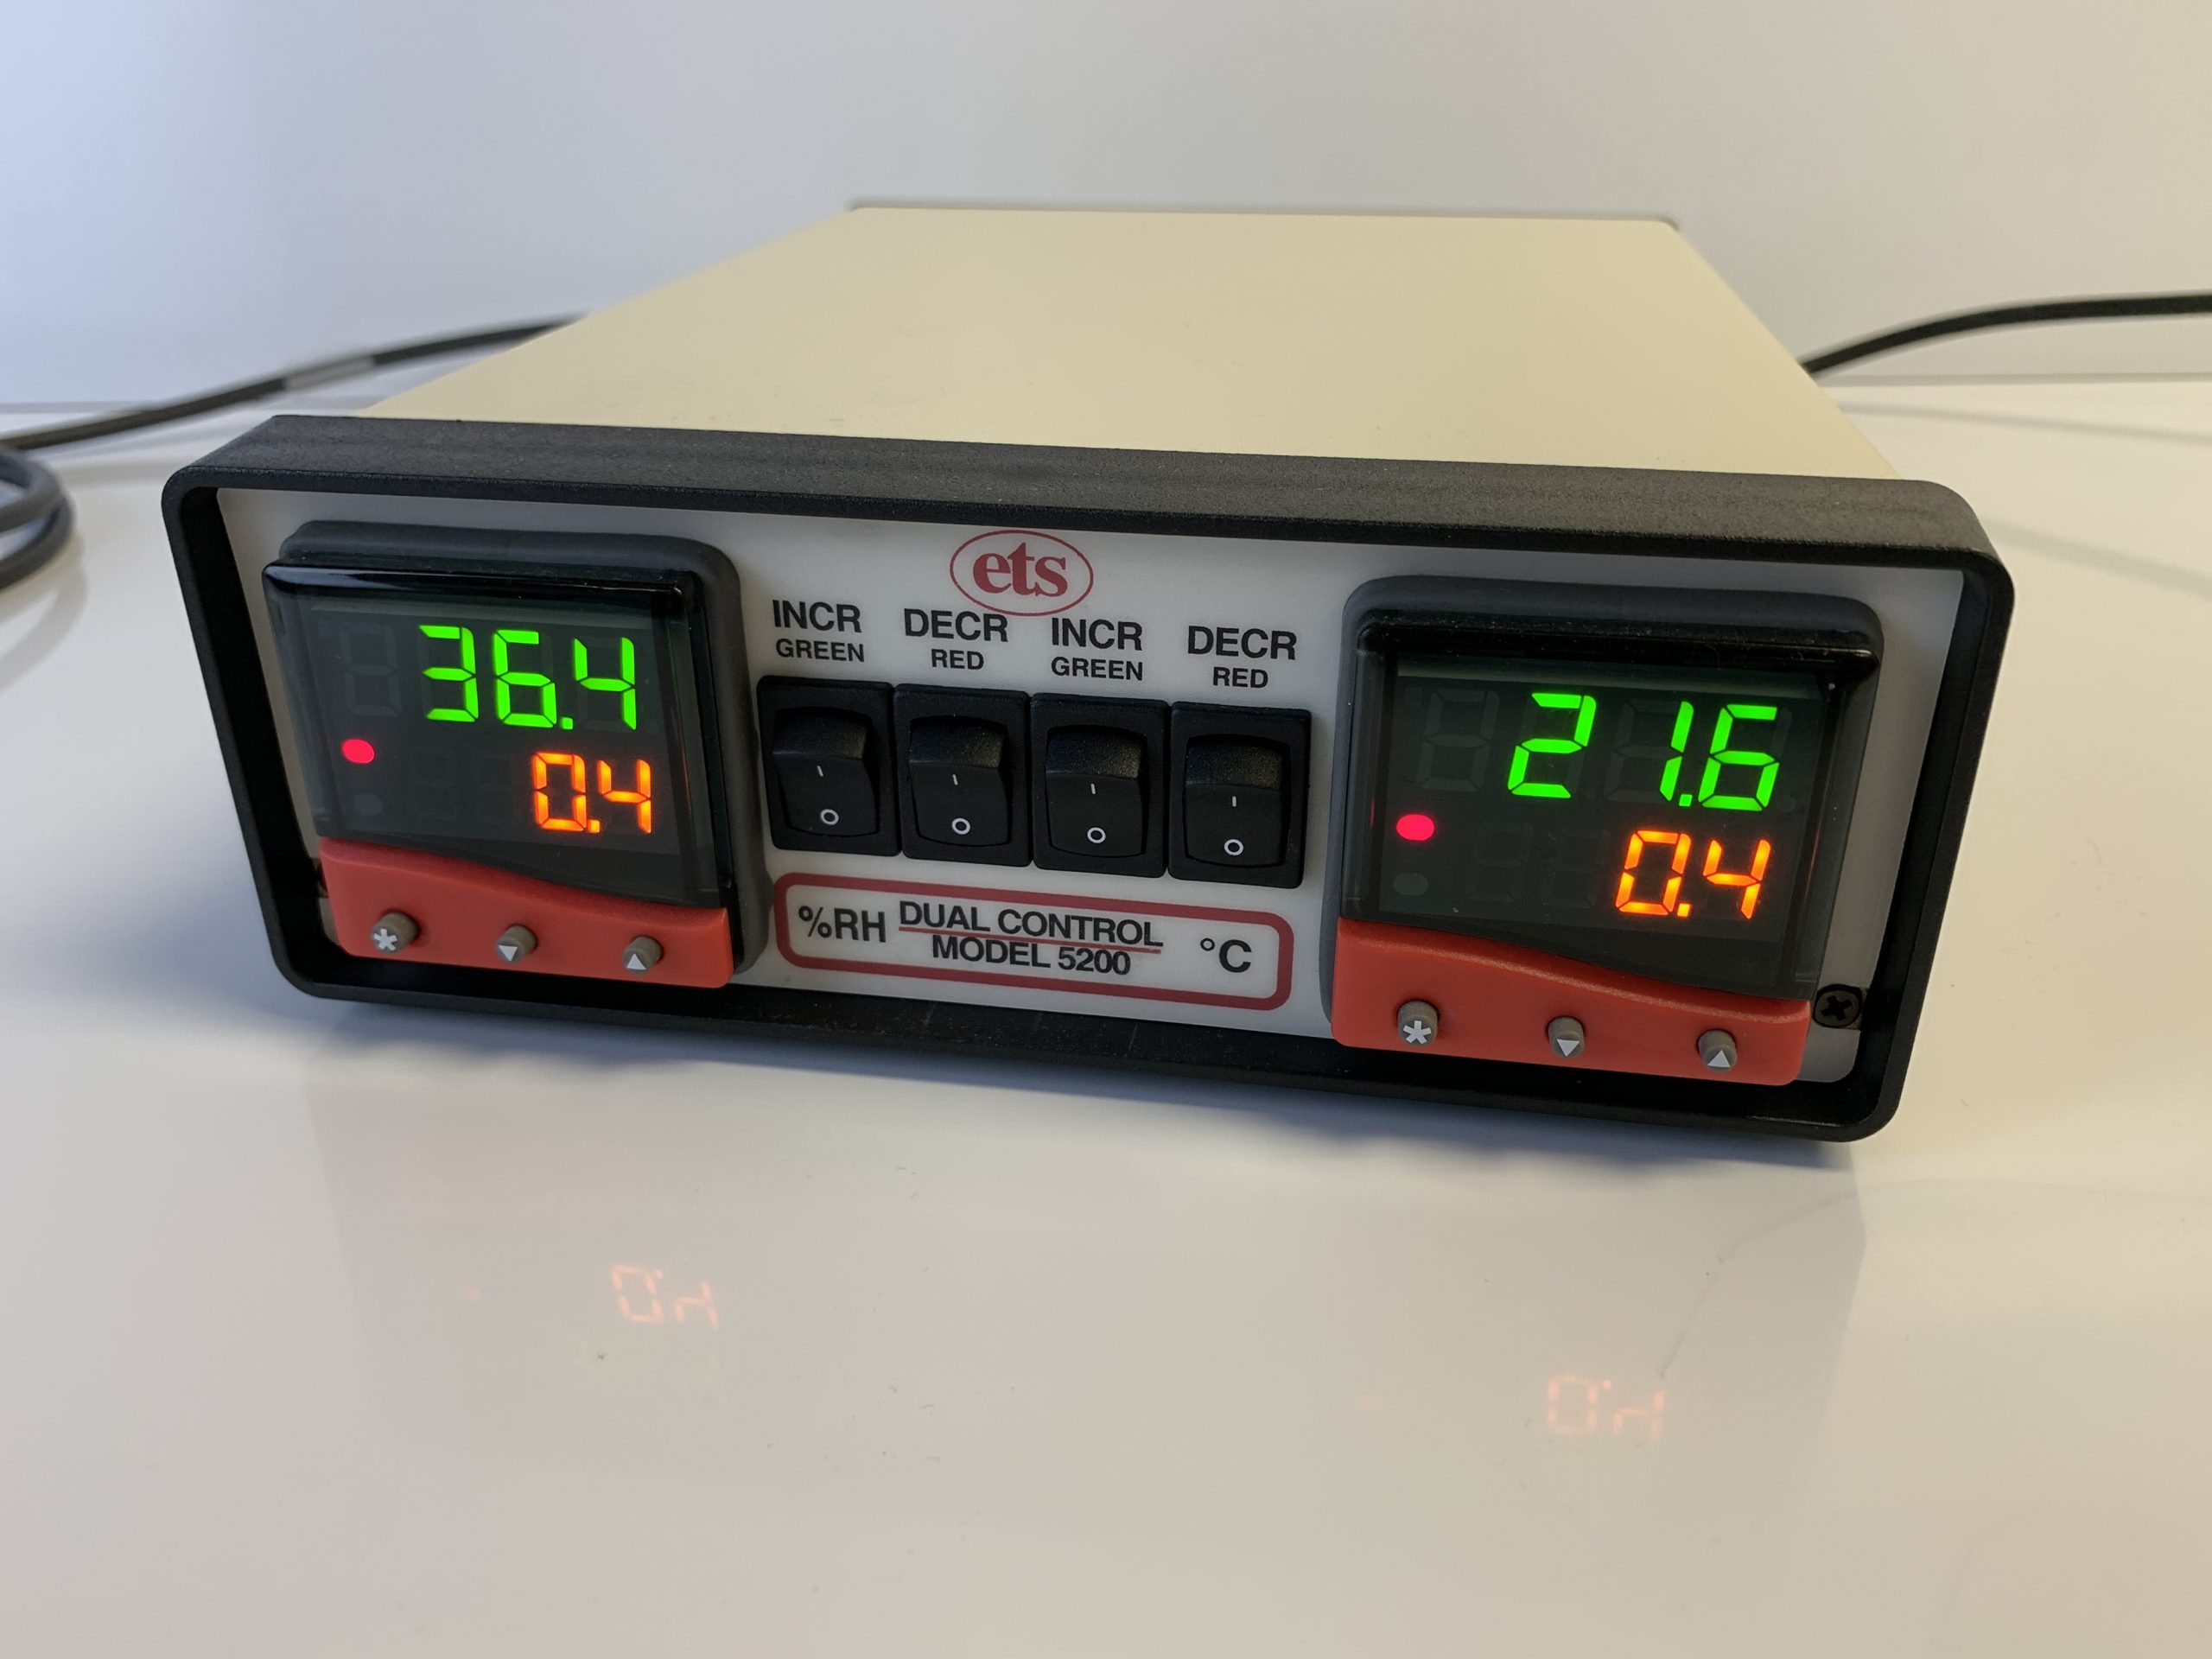 Series 5000 Humidity/Temperature Controllers